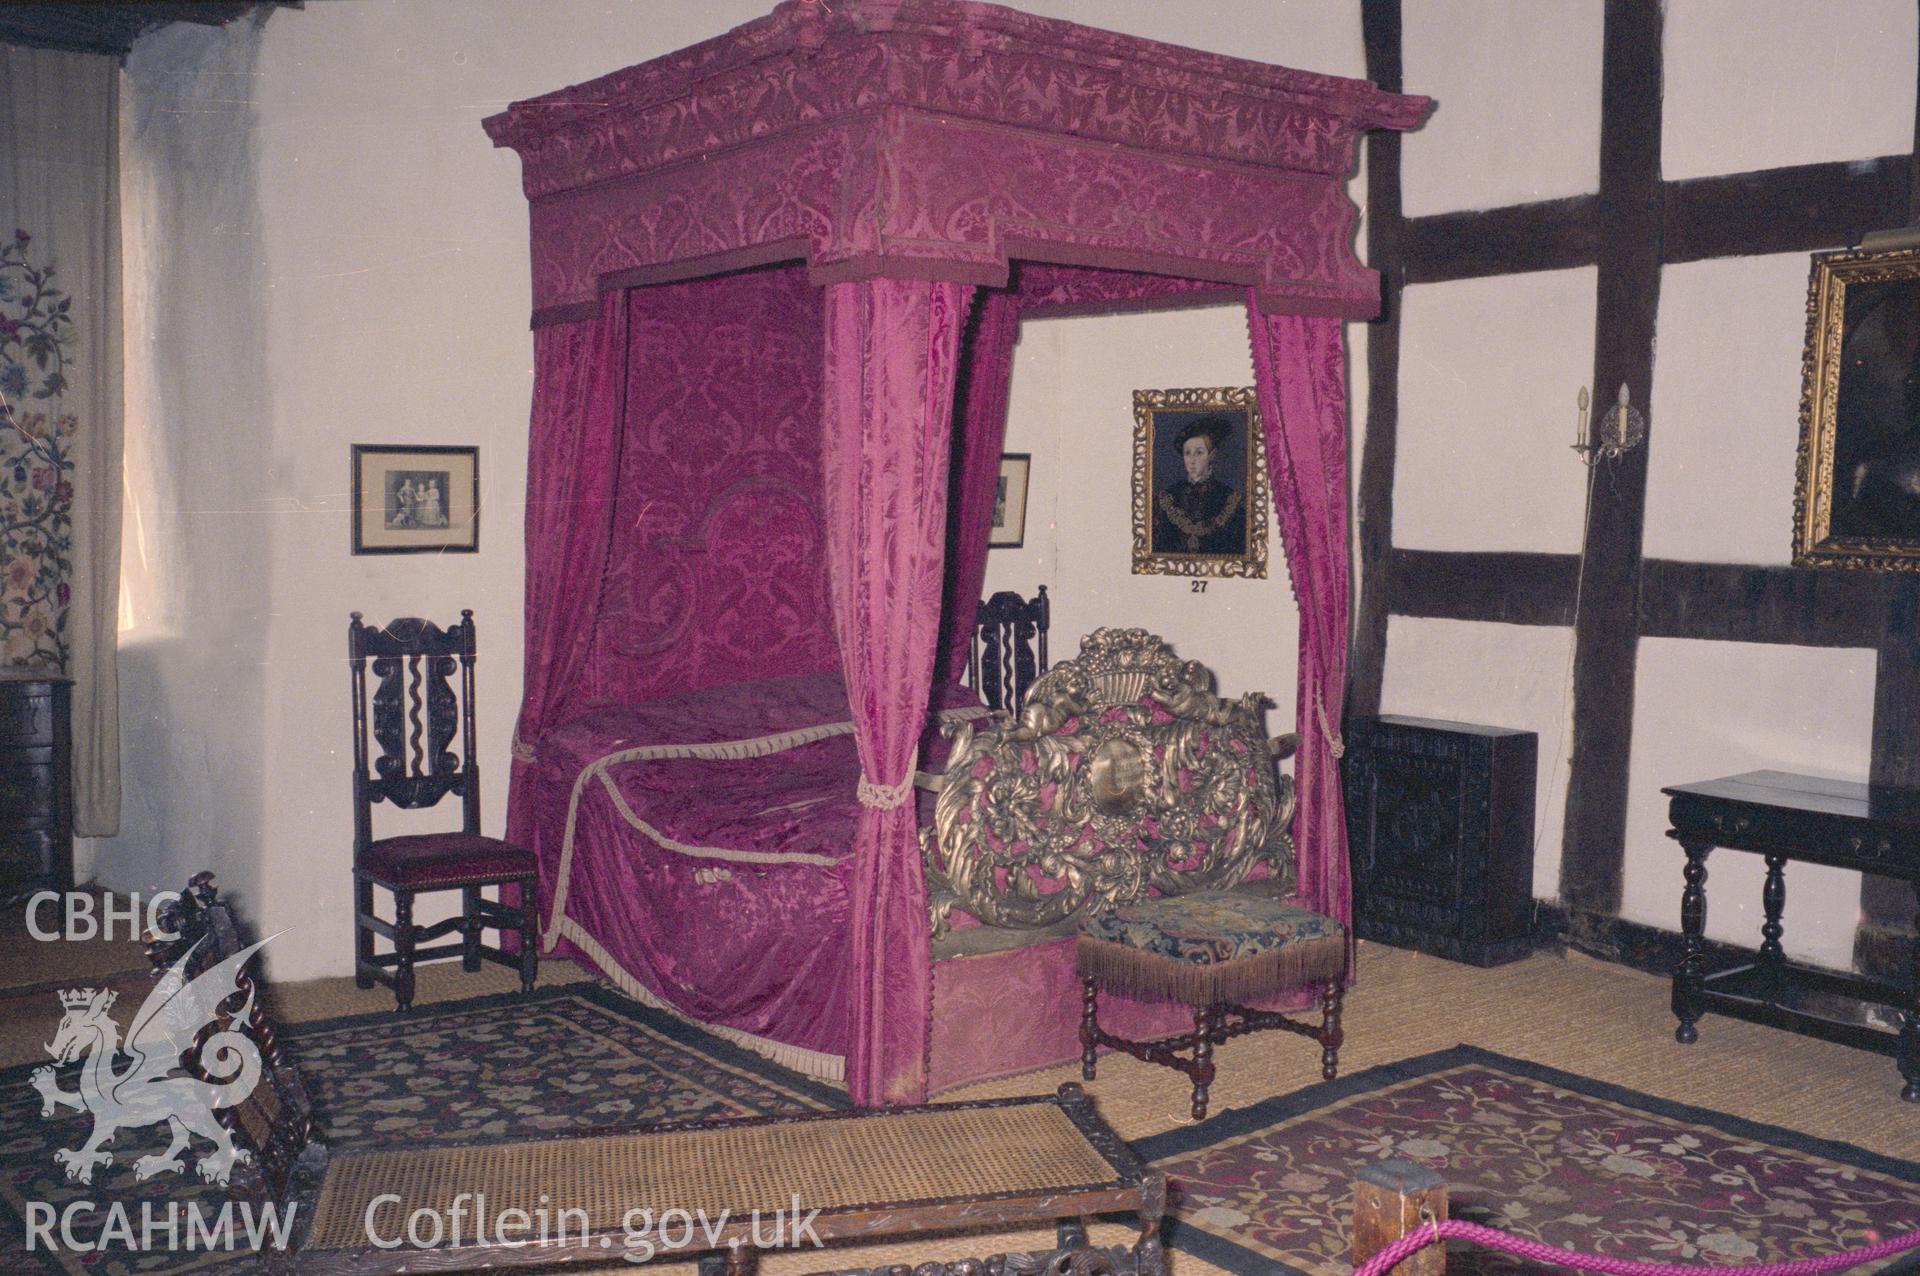 1 colour print showing view of Chirk castle interior (bedroom), collated by the former Central Office of Information.